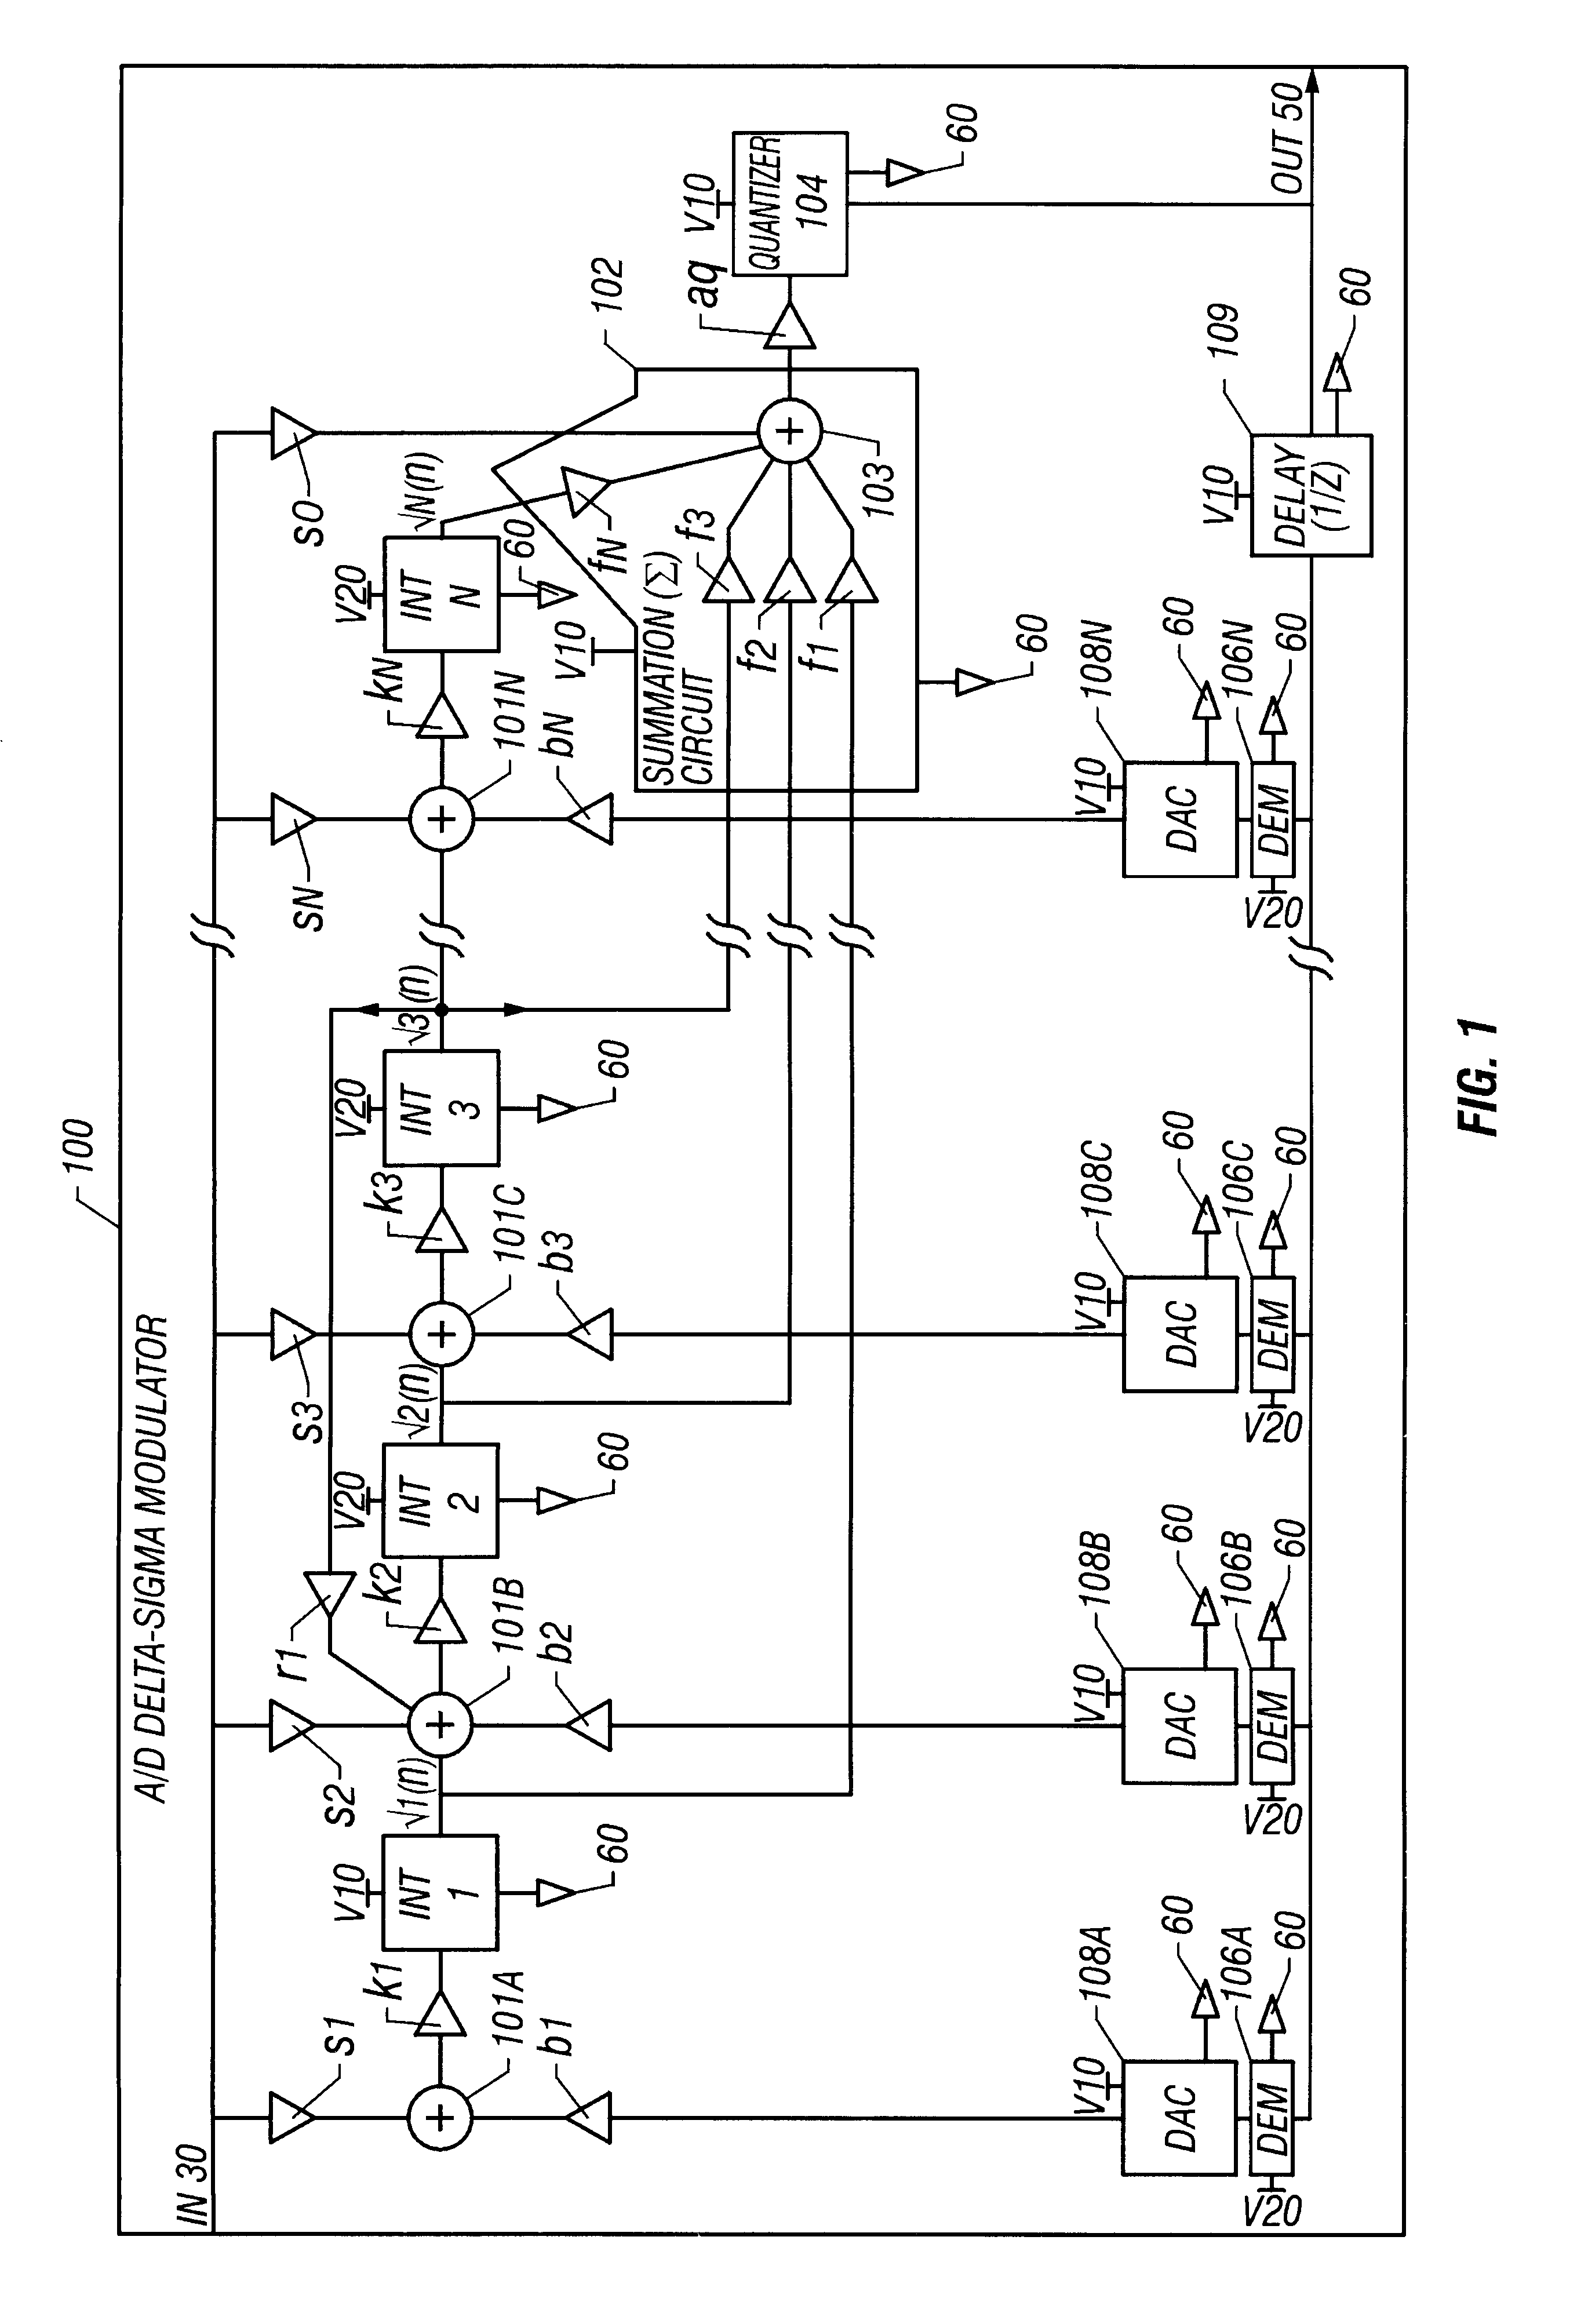 Method and system for operating two or more integrators with different power supplies for an analog-to-digital delta-sigma modulator